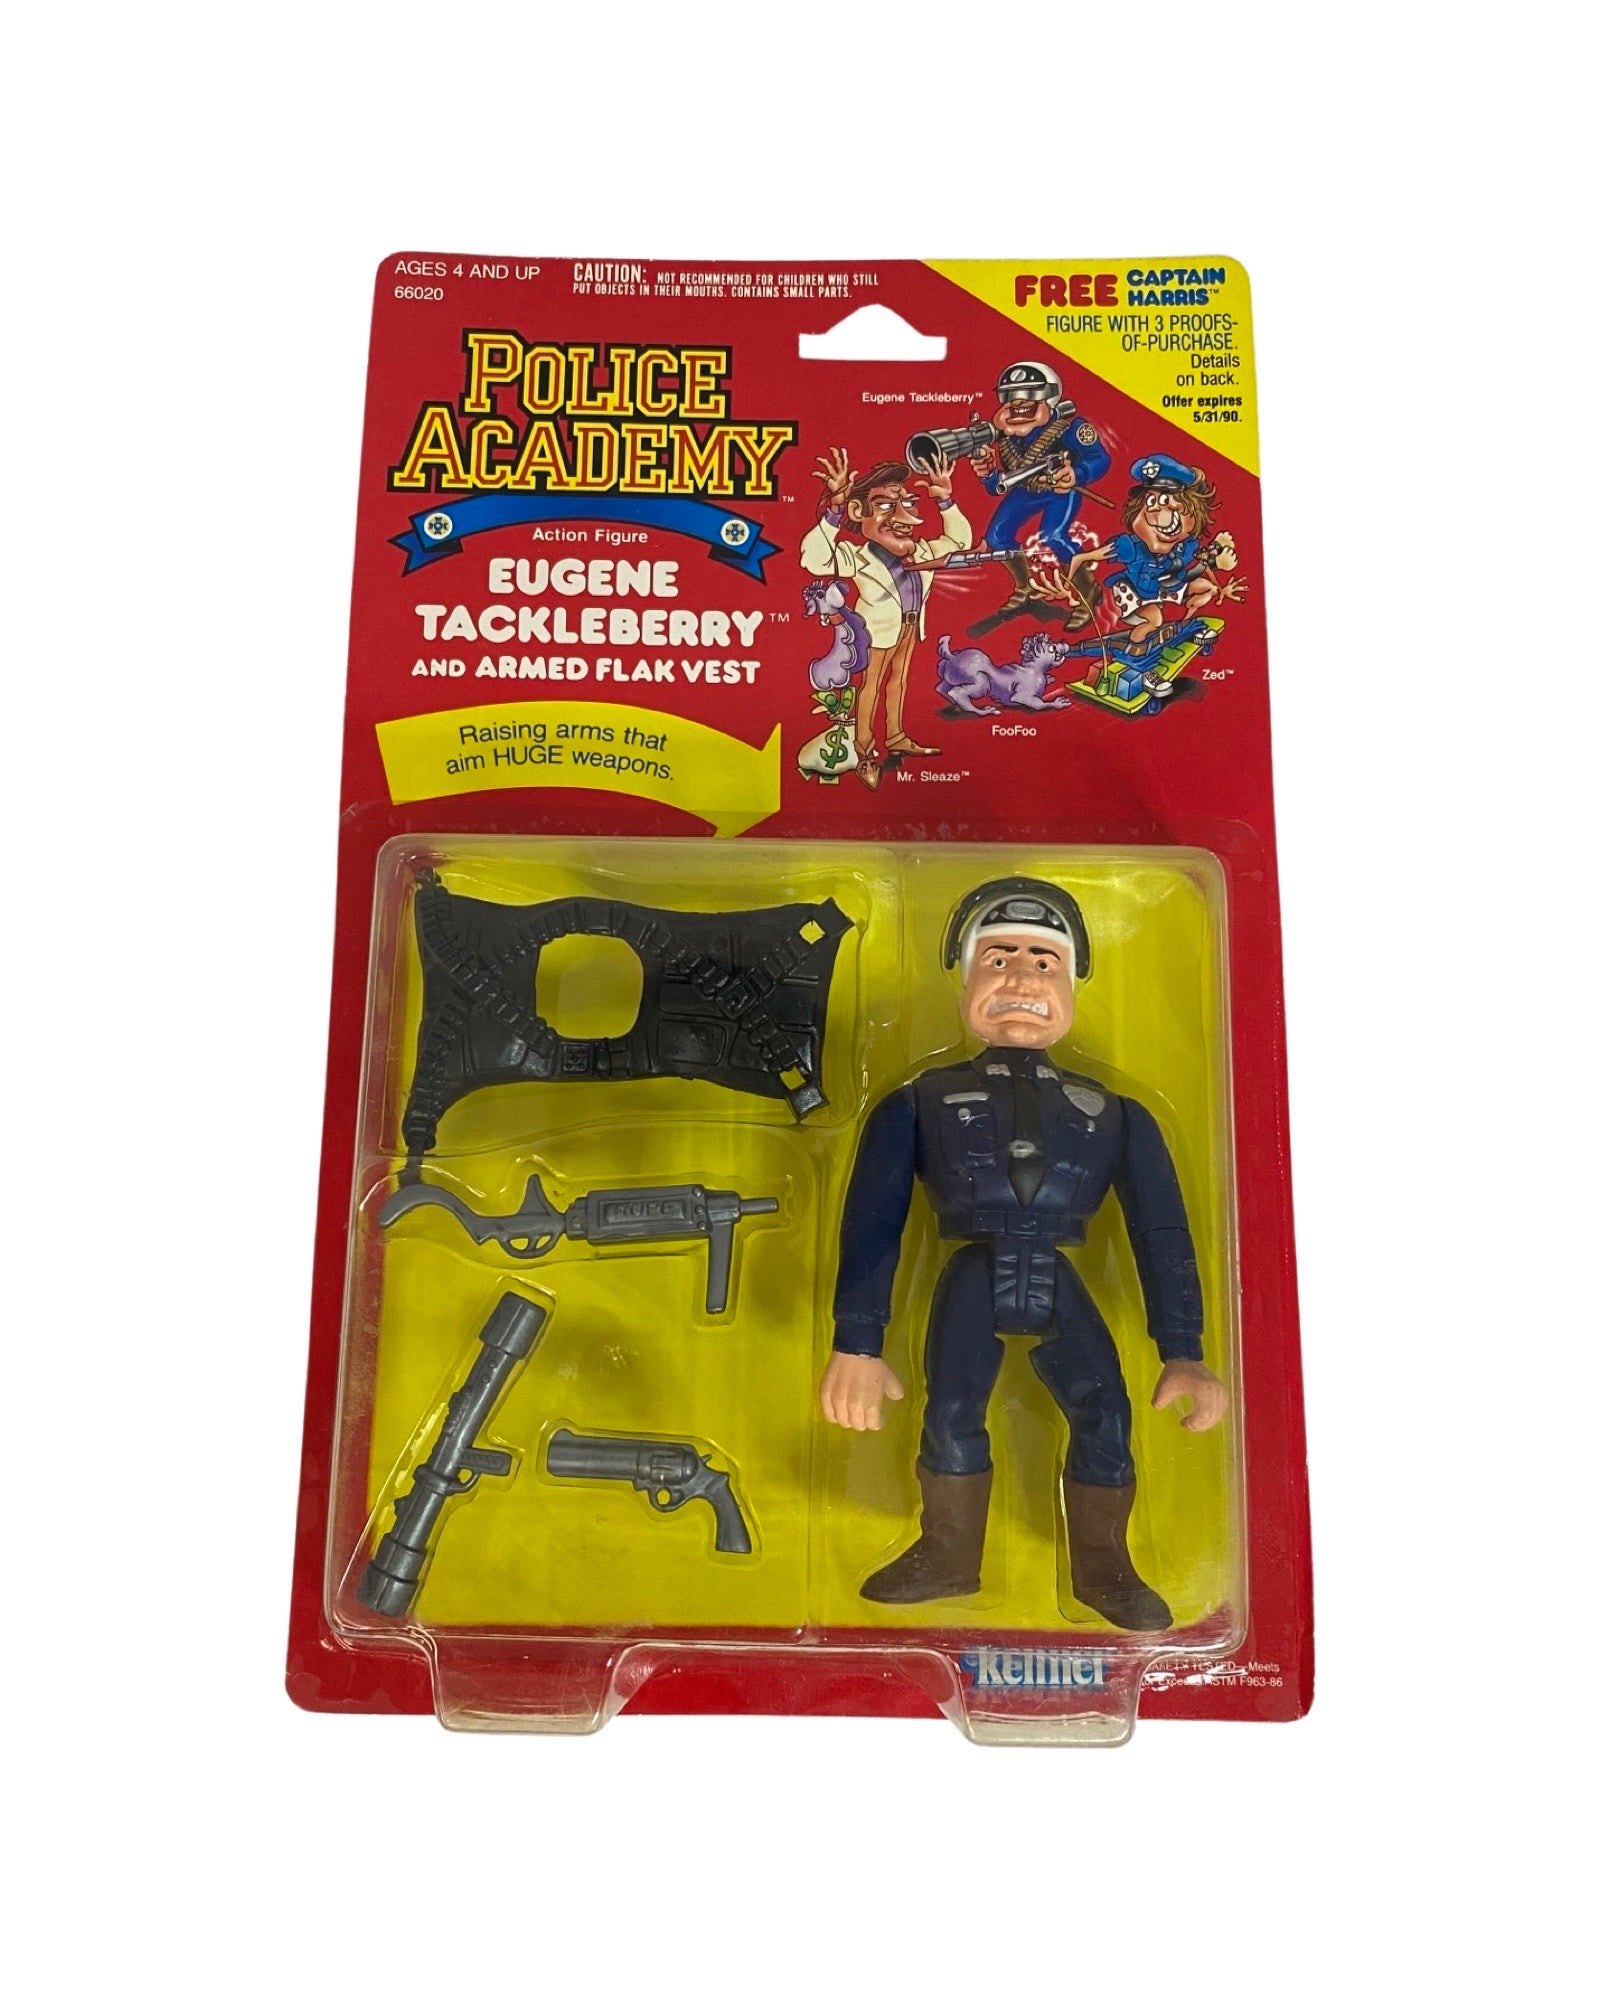 Police Academy - Tackleberry: Rope Gun Weapon Accessory - Kenner 1989